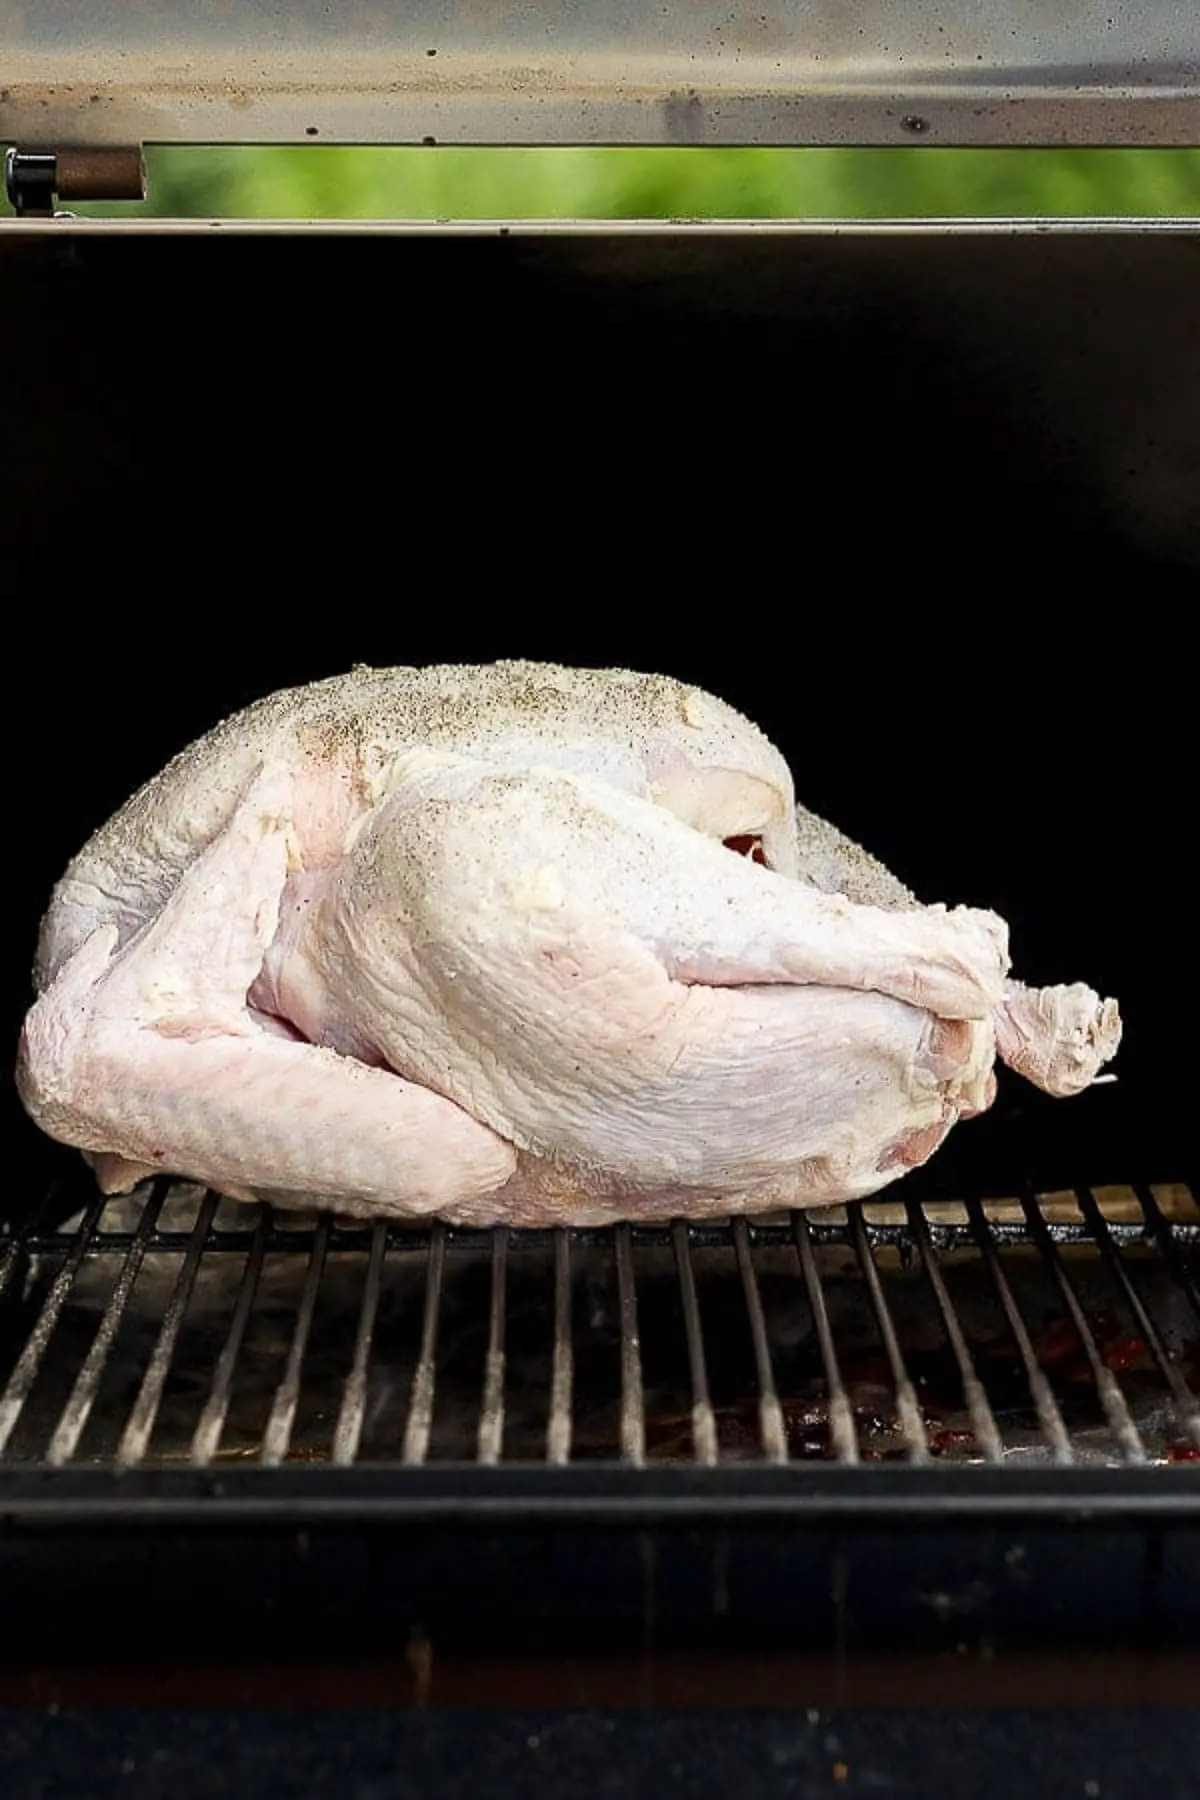 smoked turkey breast side up or down - Should you smoke turkey breast up or down